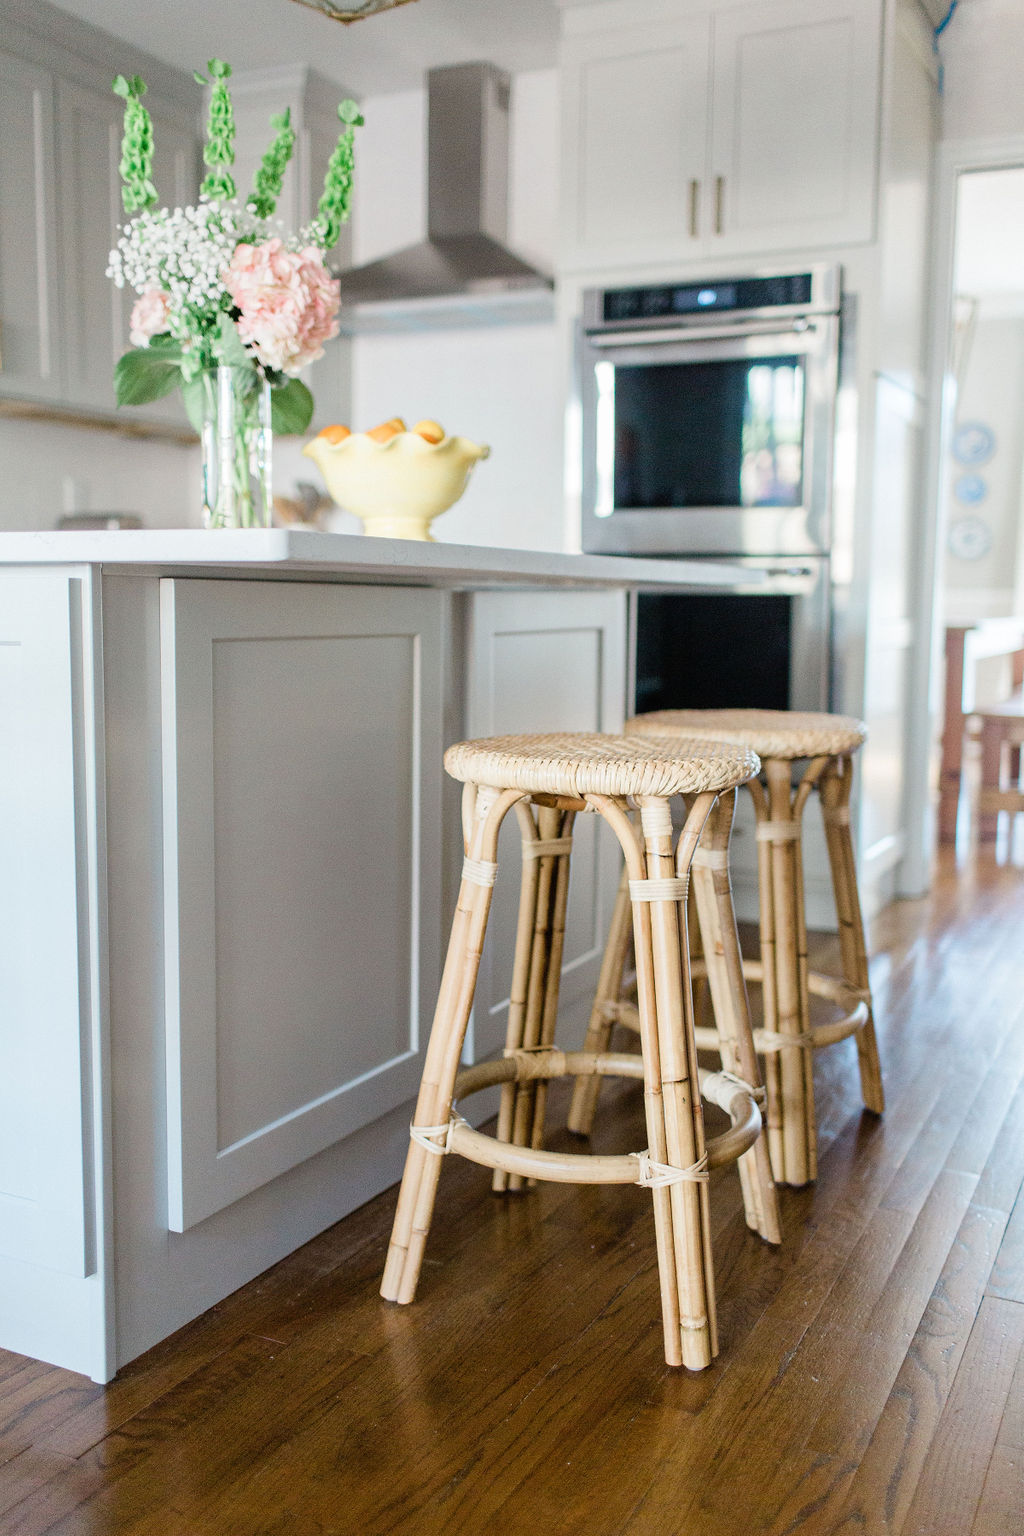 The Ultimate Guide To Non-Toxic, Low VOC Kitchen Cabinets